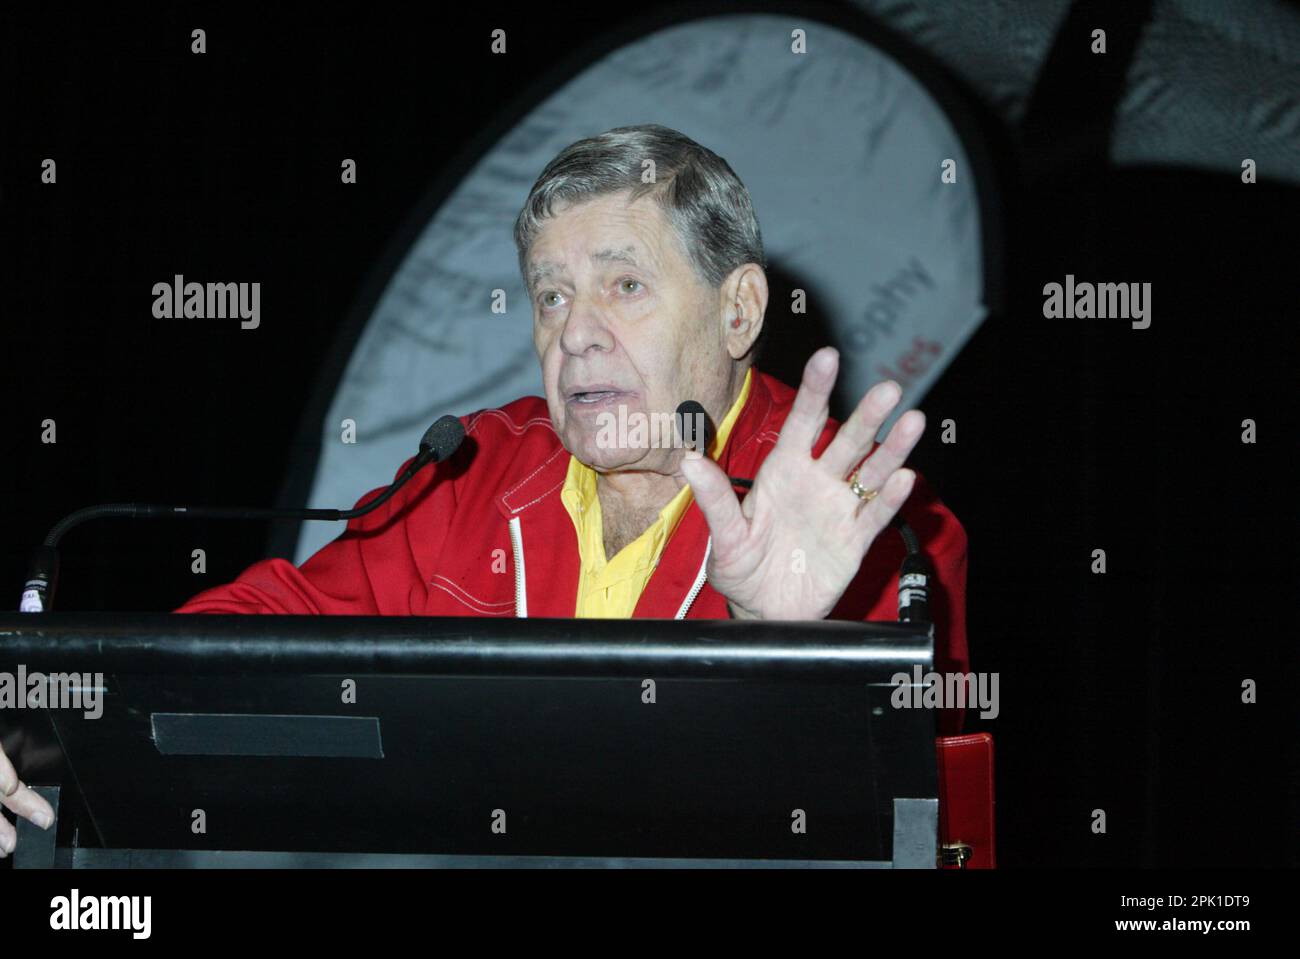 Jerry Lewis  conducts a press conference along with a meet-and-greet with families afflicted by Muscular Dystrophy ahead of his fund-raising 'Laugh For Life' comedy concert being held in Sydney on September 21st. Sydney, Australia - 16.09.09 Stock Photo